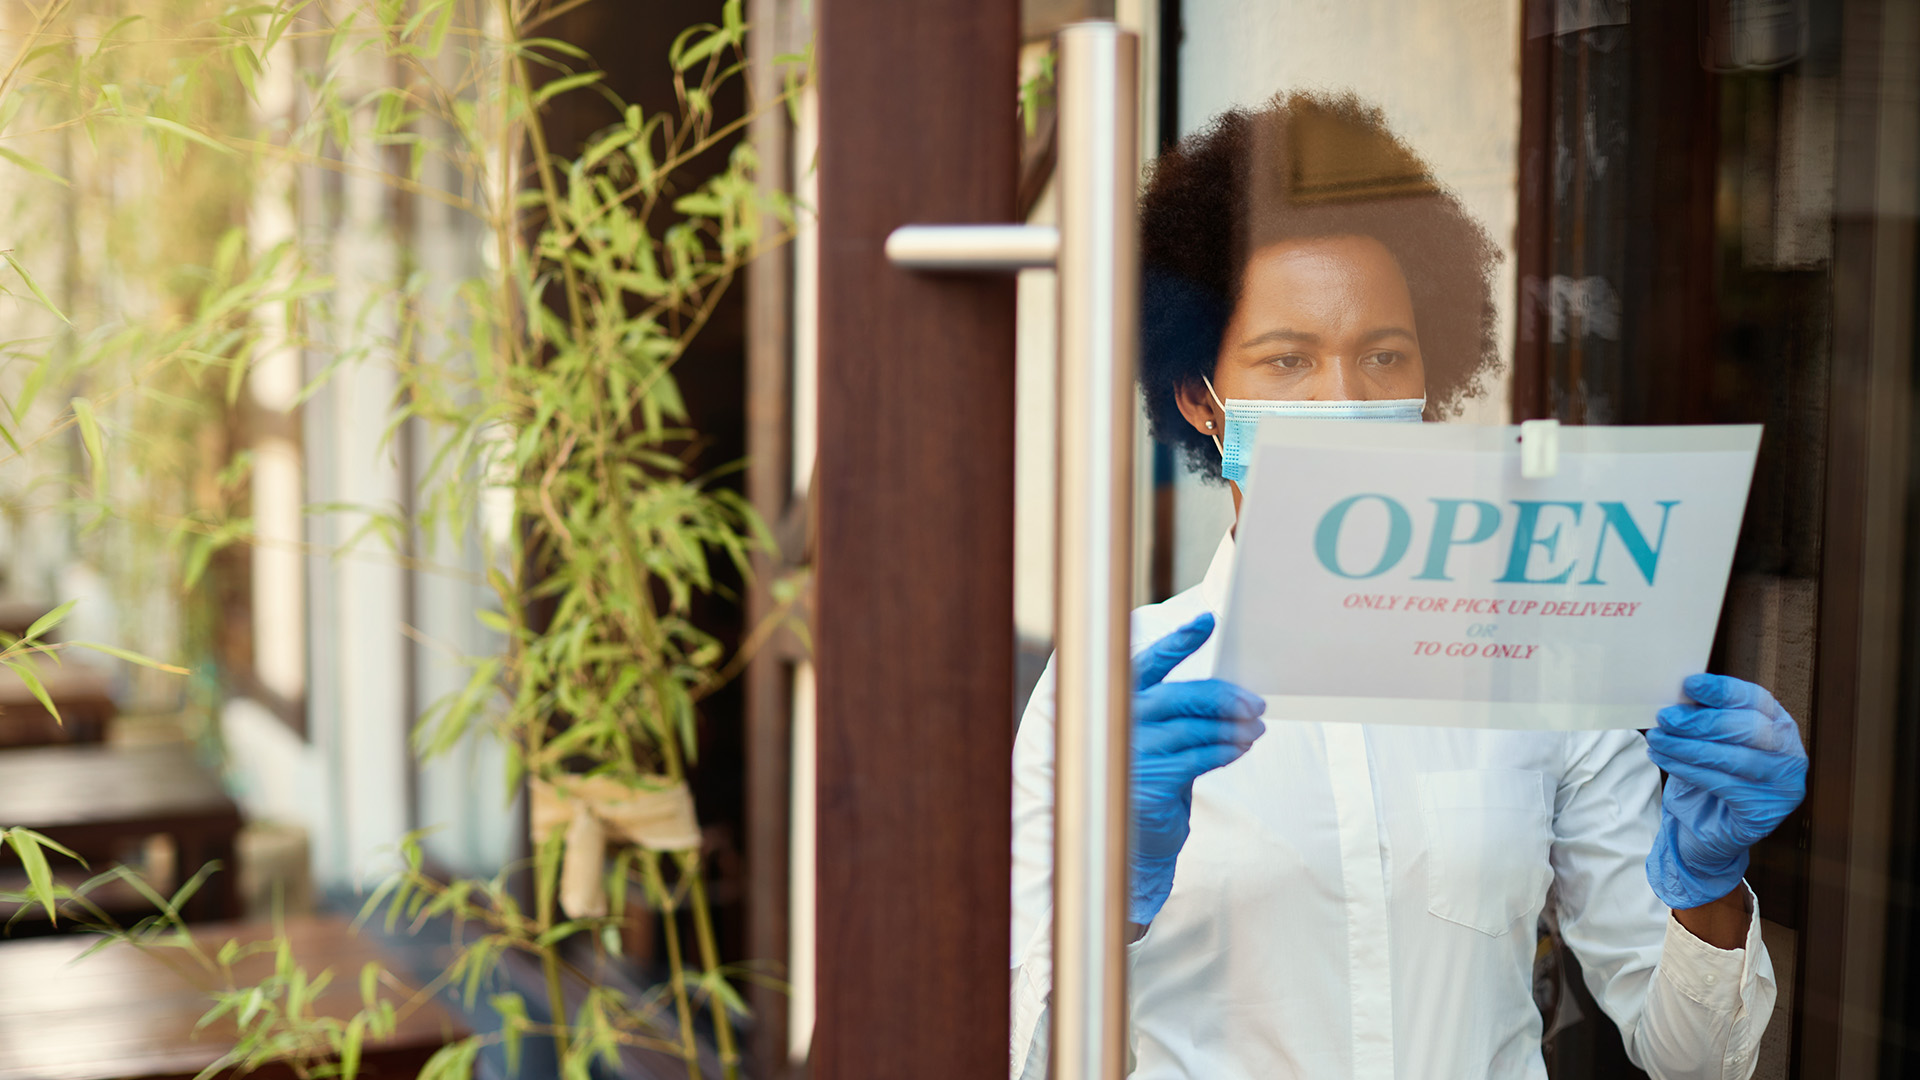 Photo of a woman placing an "Open" sign on the door of a business